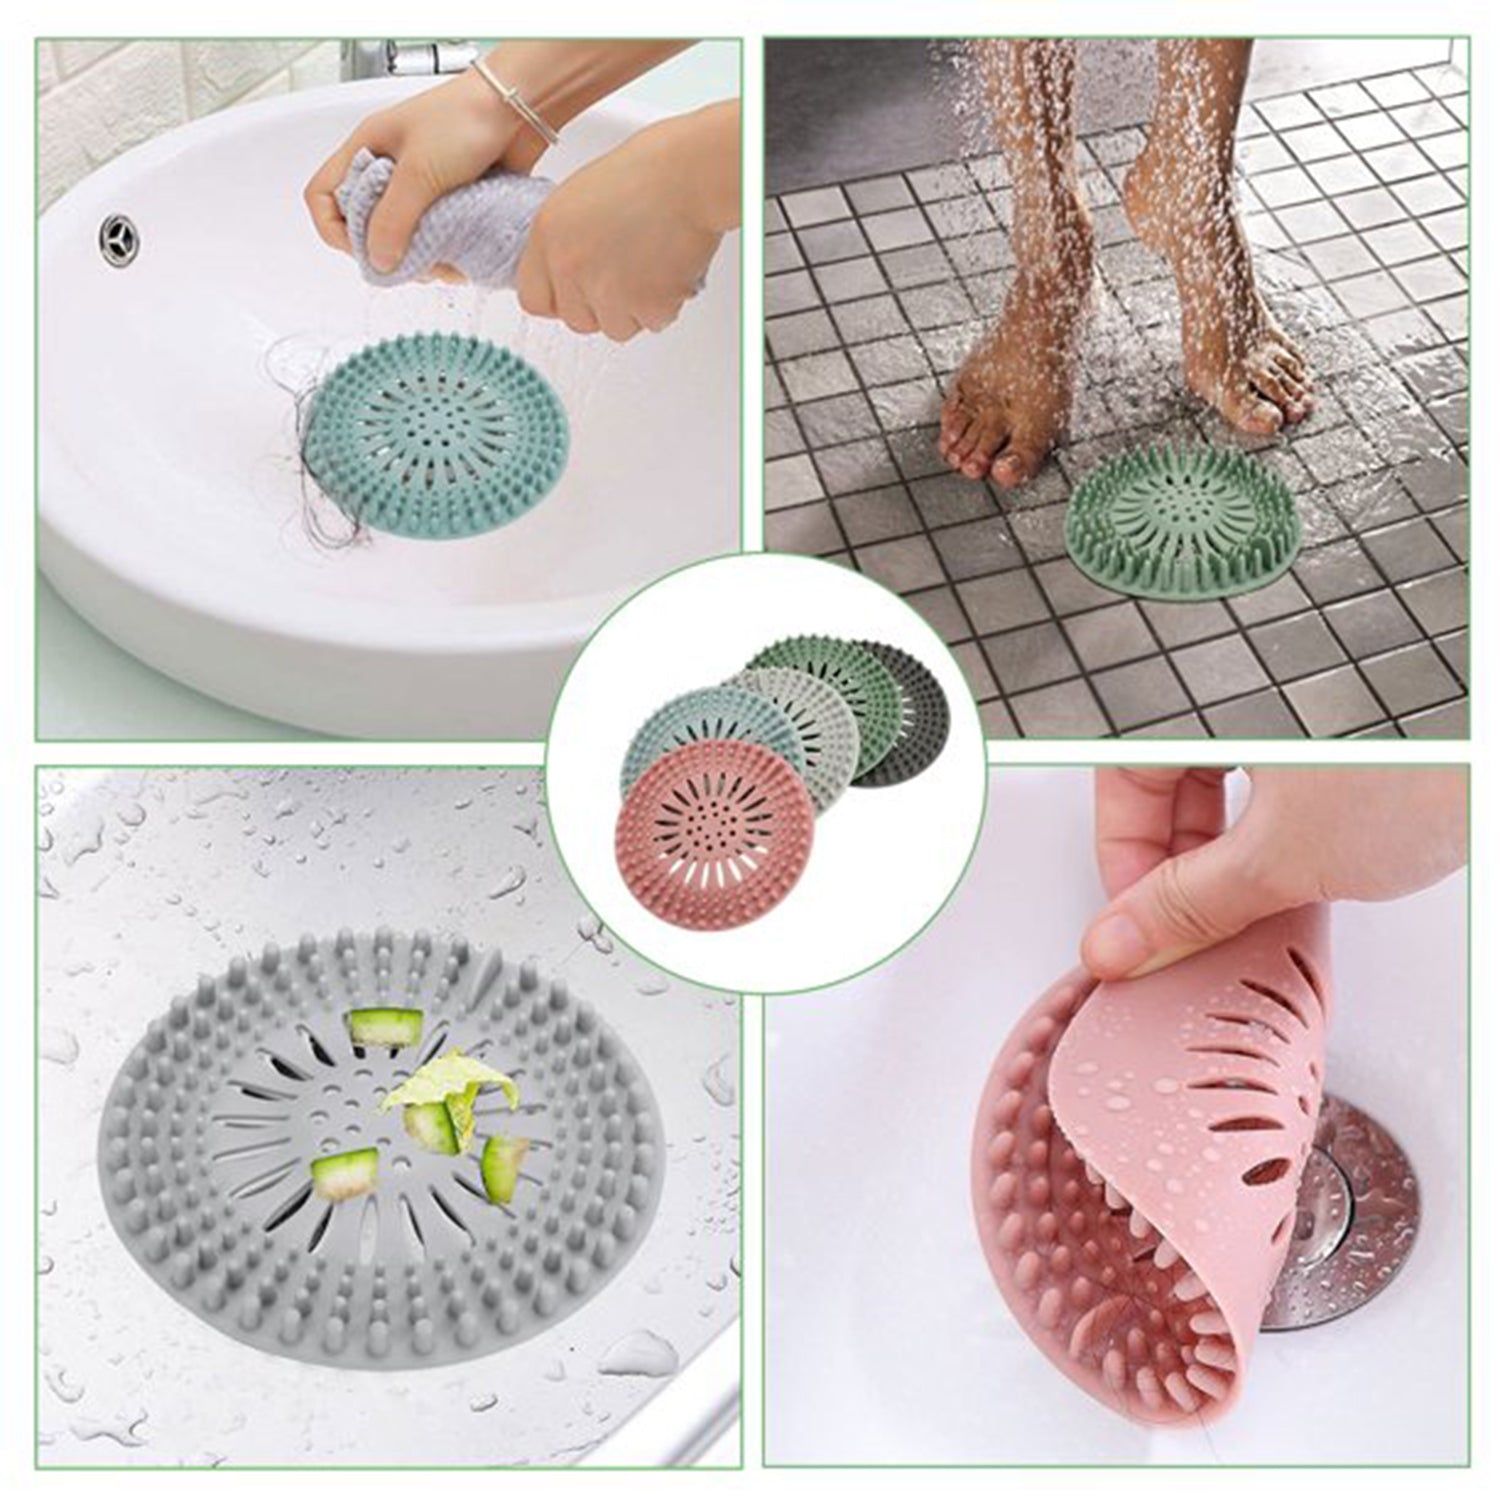 Arsha creation Shower Drain Cover Used for draining water present over floor surfaces of bathroom and toilets etc.